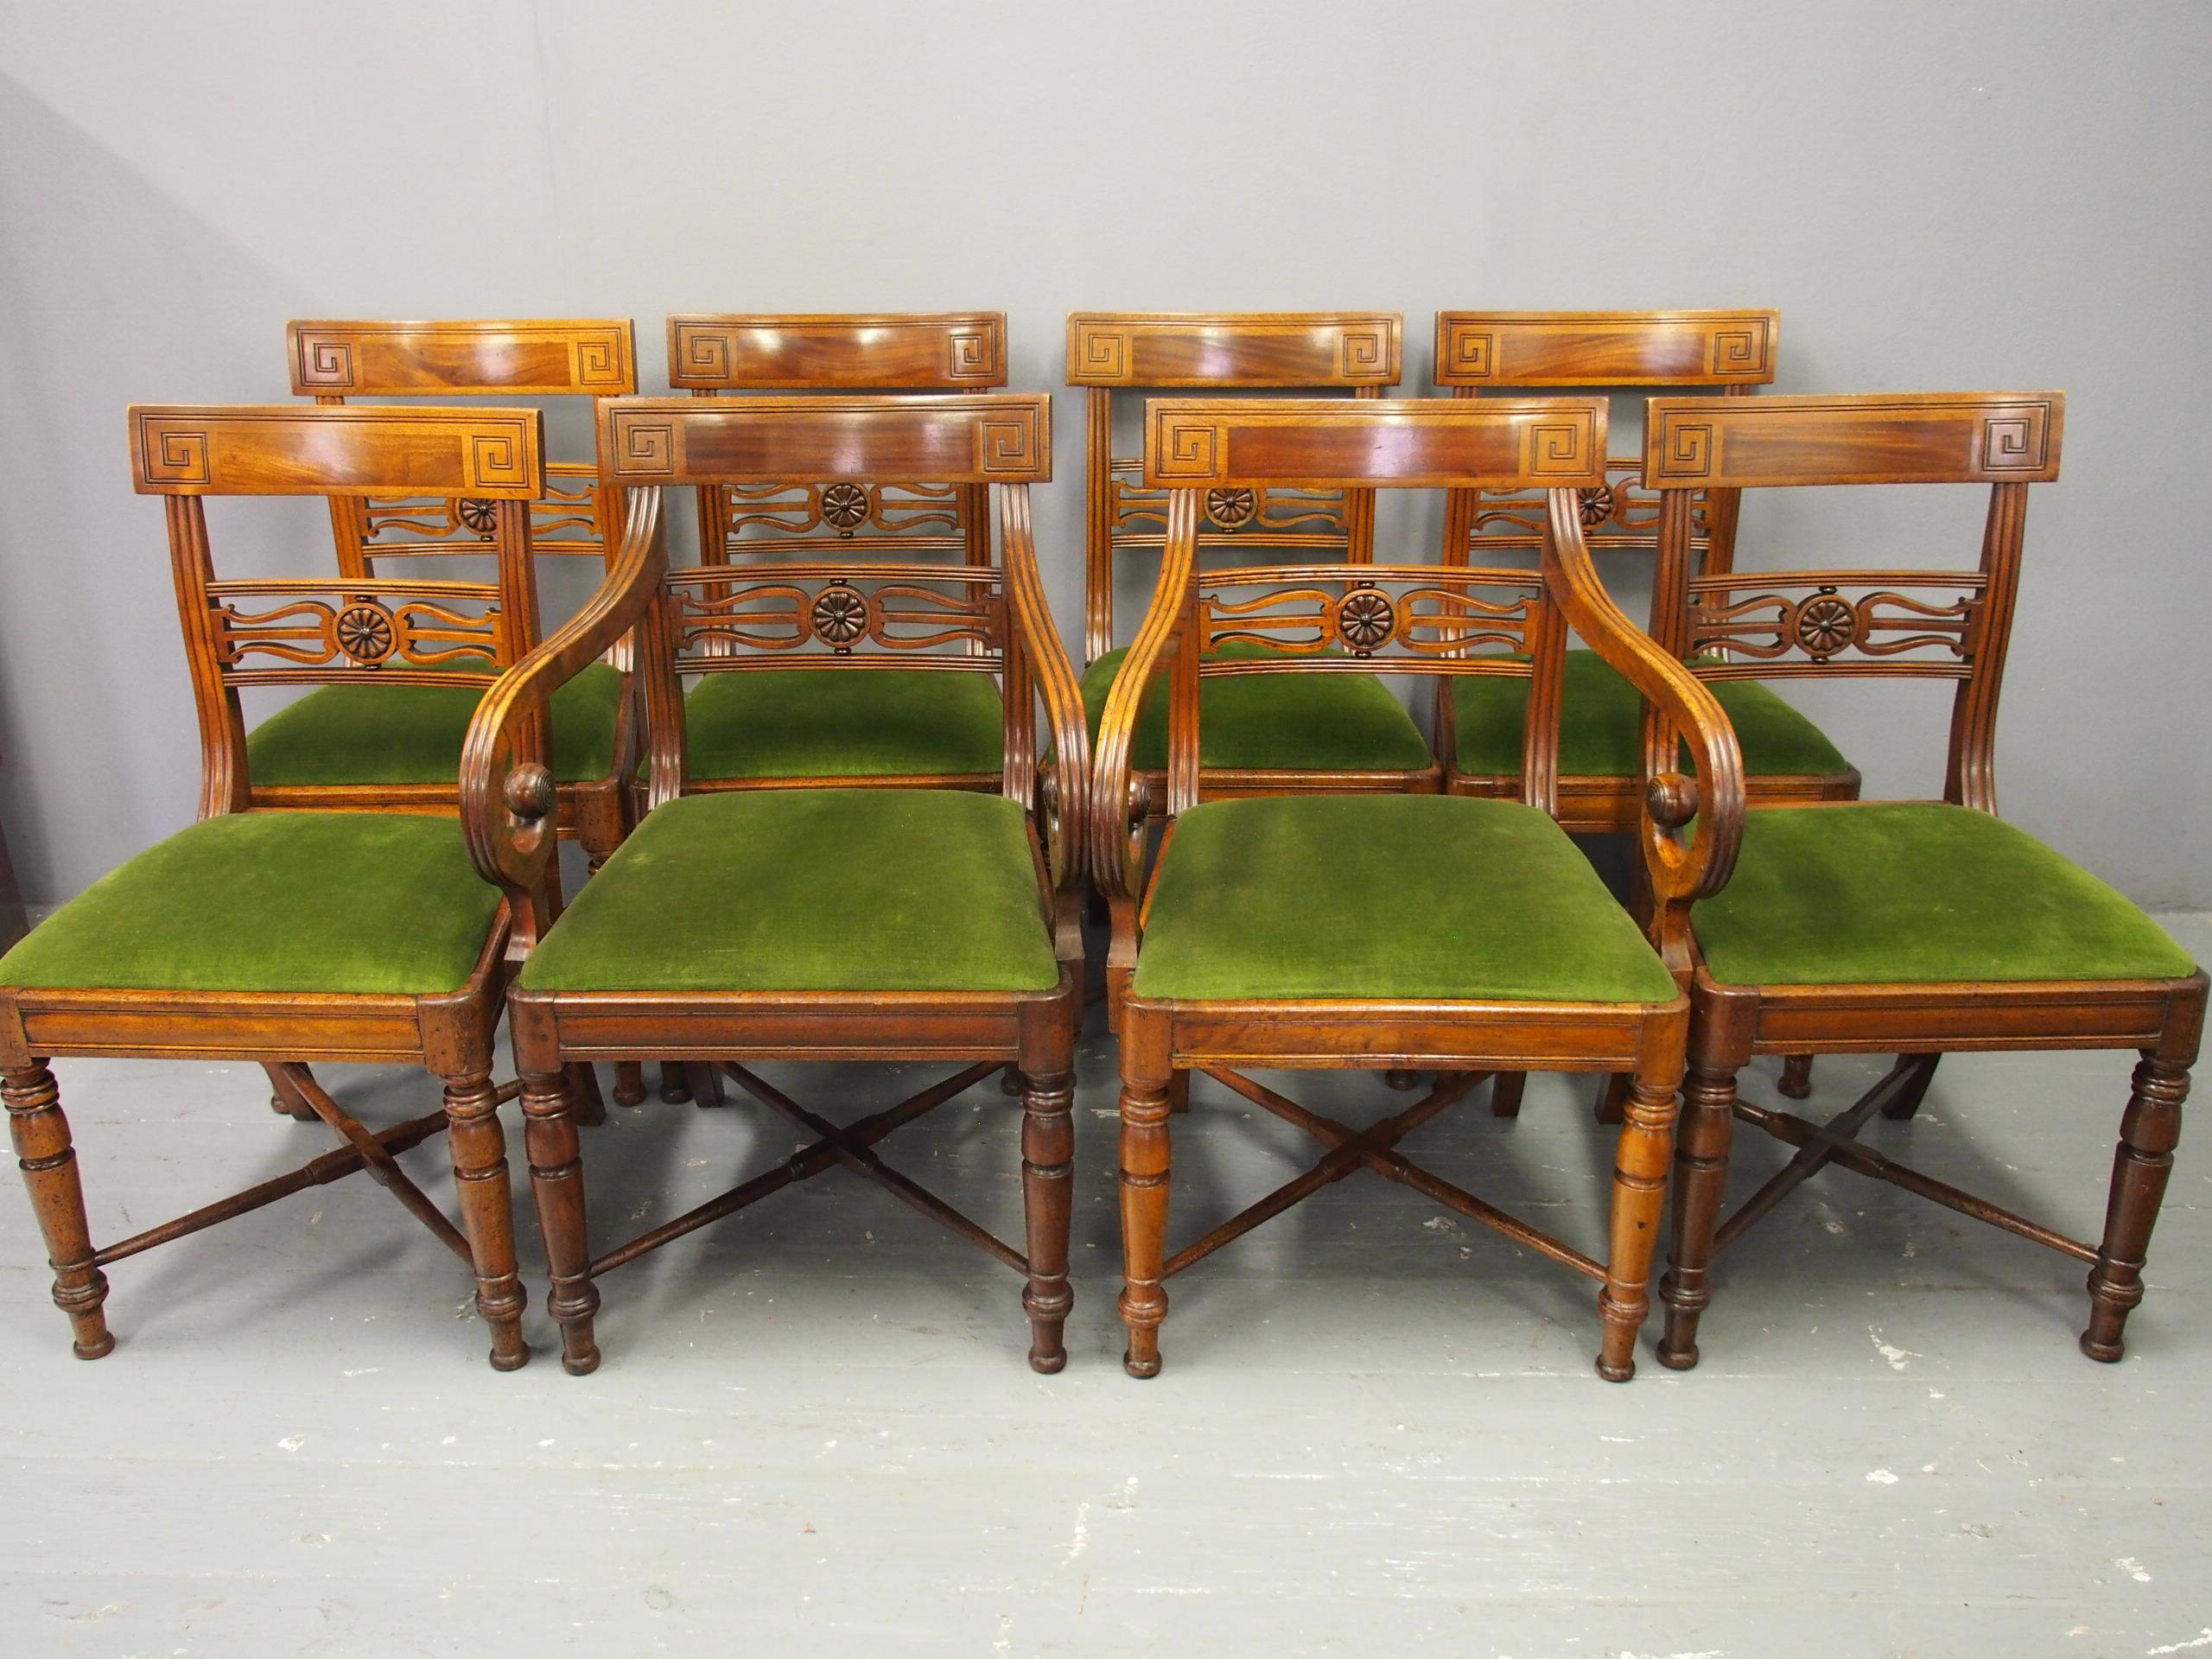 A good set of 8 mahogany George IV dining chairs, consisting of 6 side chairs and 2 armchairs, circa 1825. With Greek key pattern carving to the top rails, the central splat in a combination of reeding, carved flower heads and a lyre style pattern